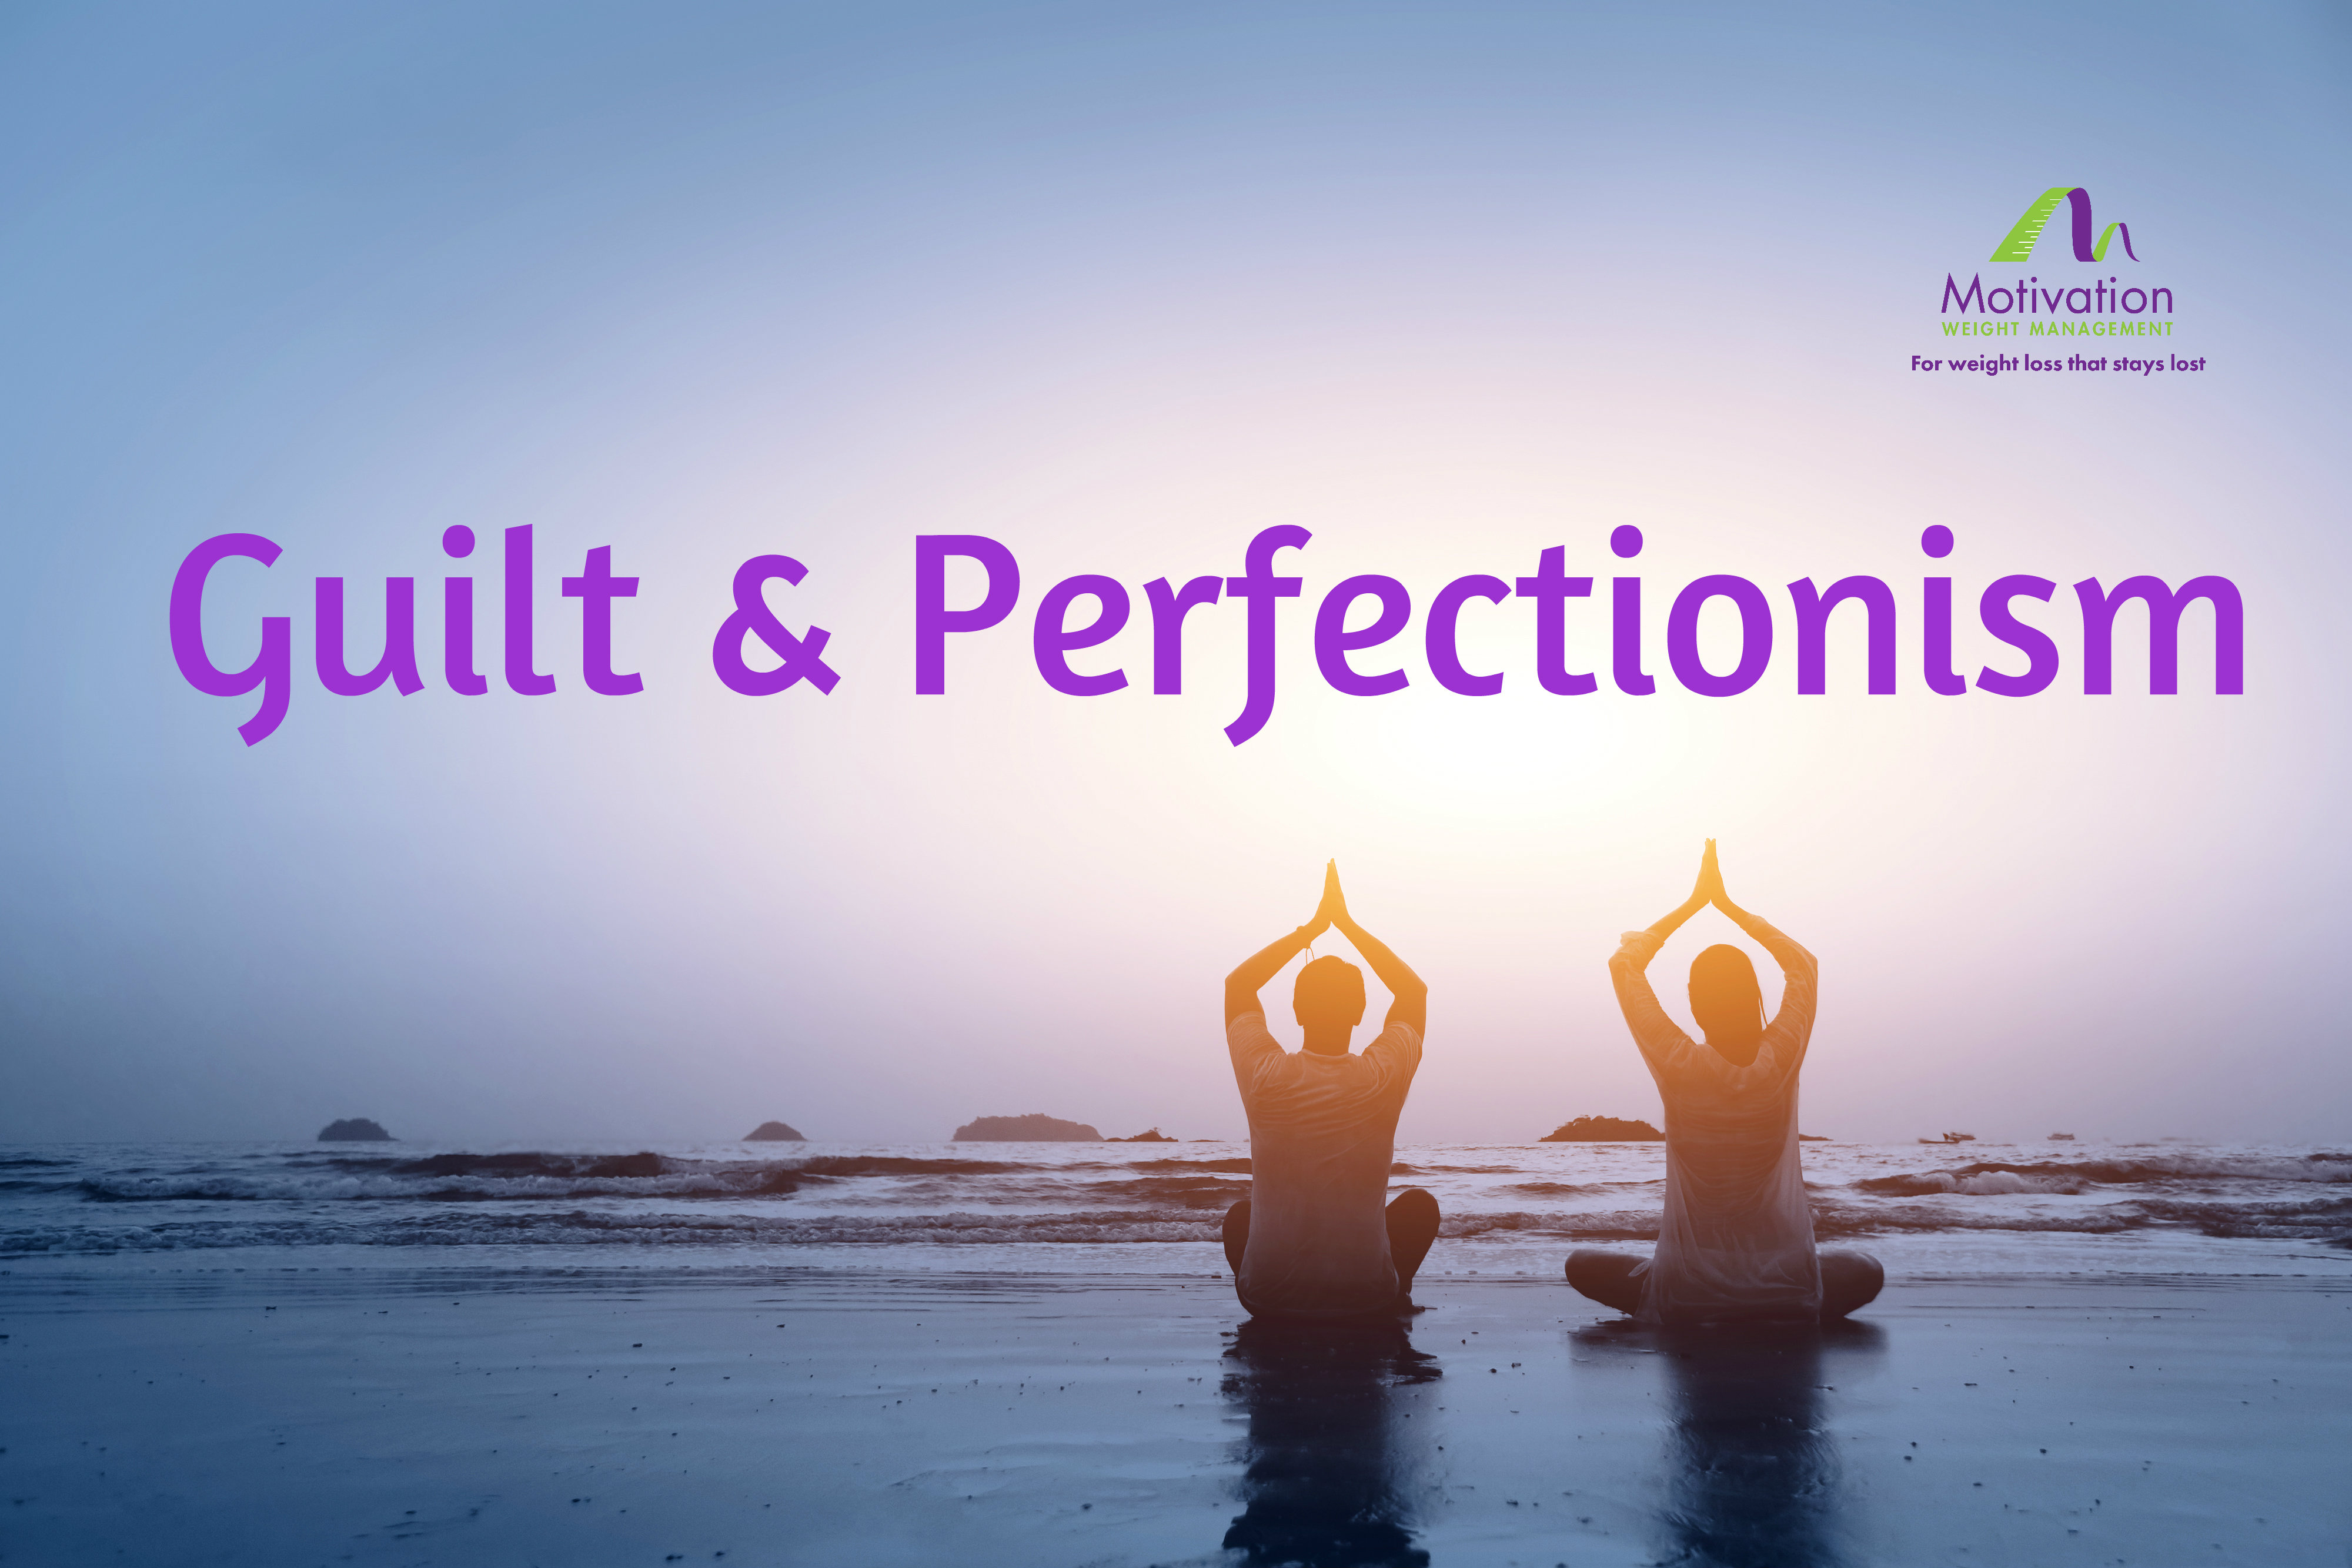 Day 3 Guilt & Perfectionism